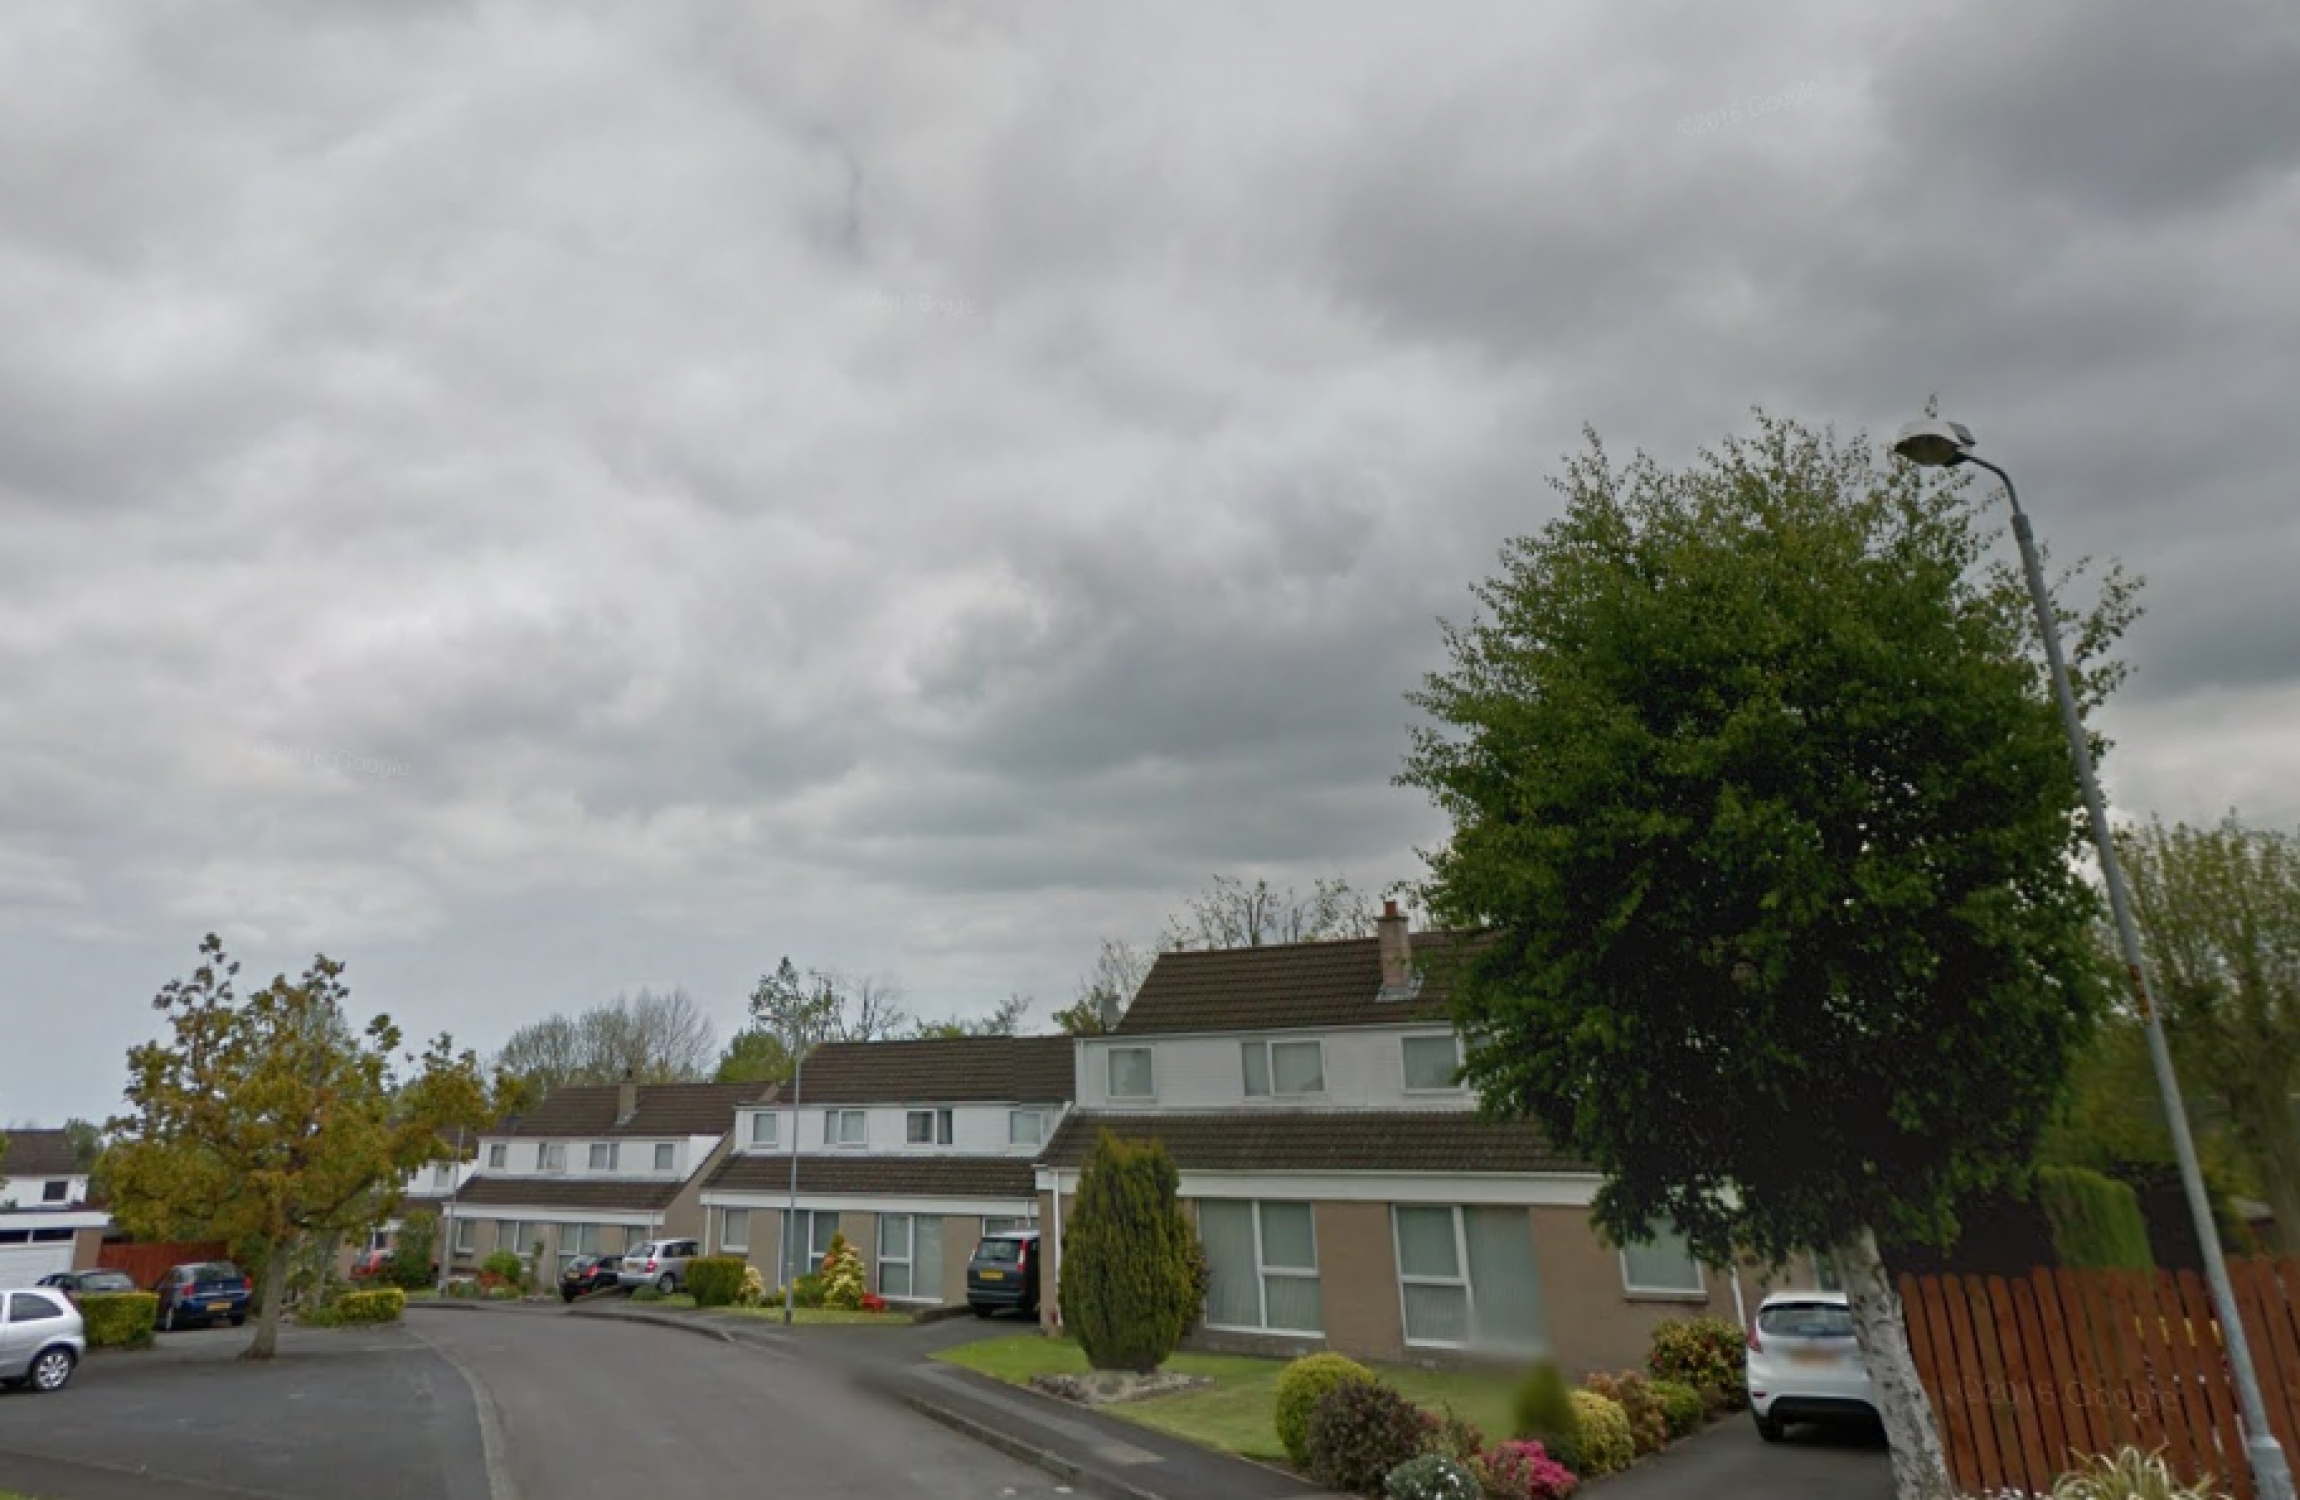 Elderly couple found dead in Co Armagh home